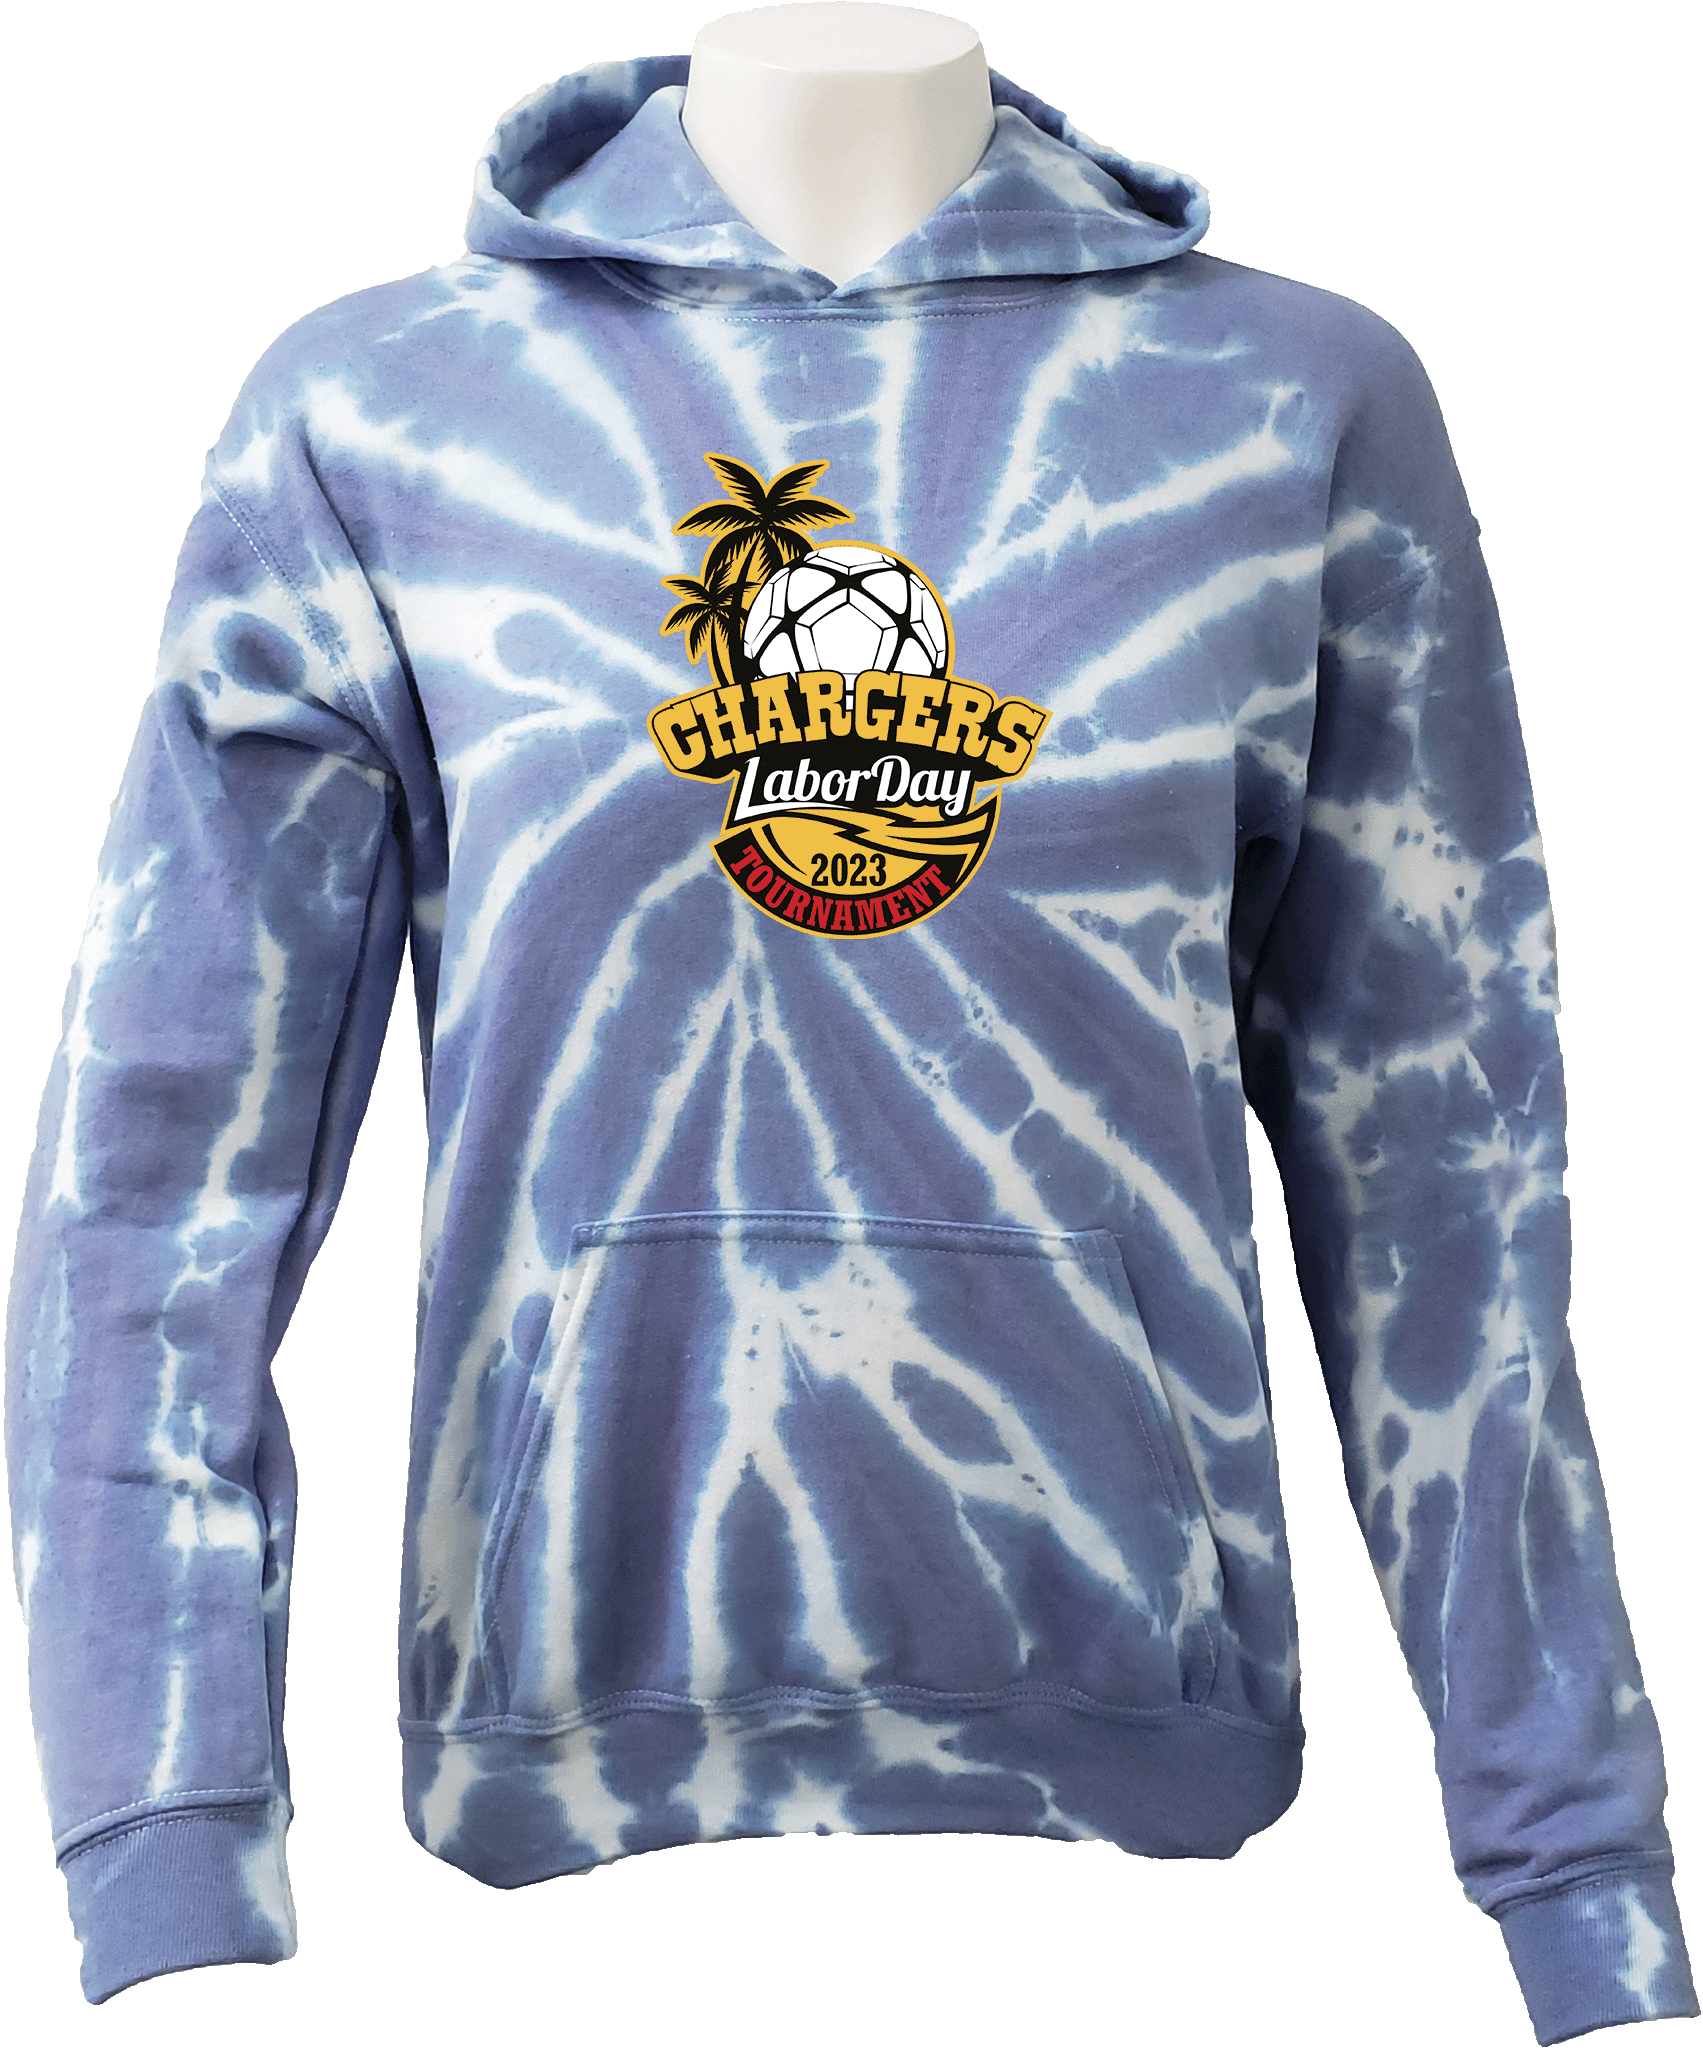 Tie-Dye Hoodies - 2023 Chargers Labor Day Tournament